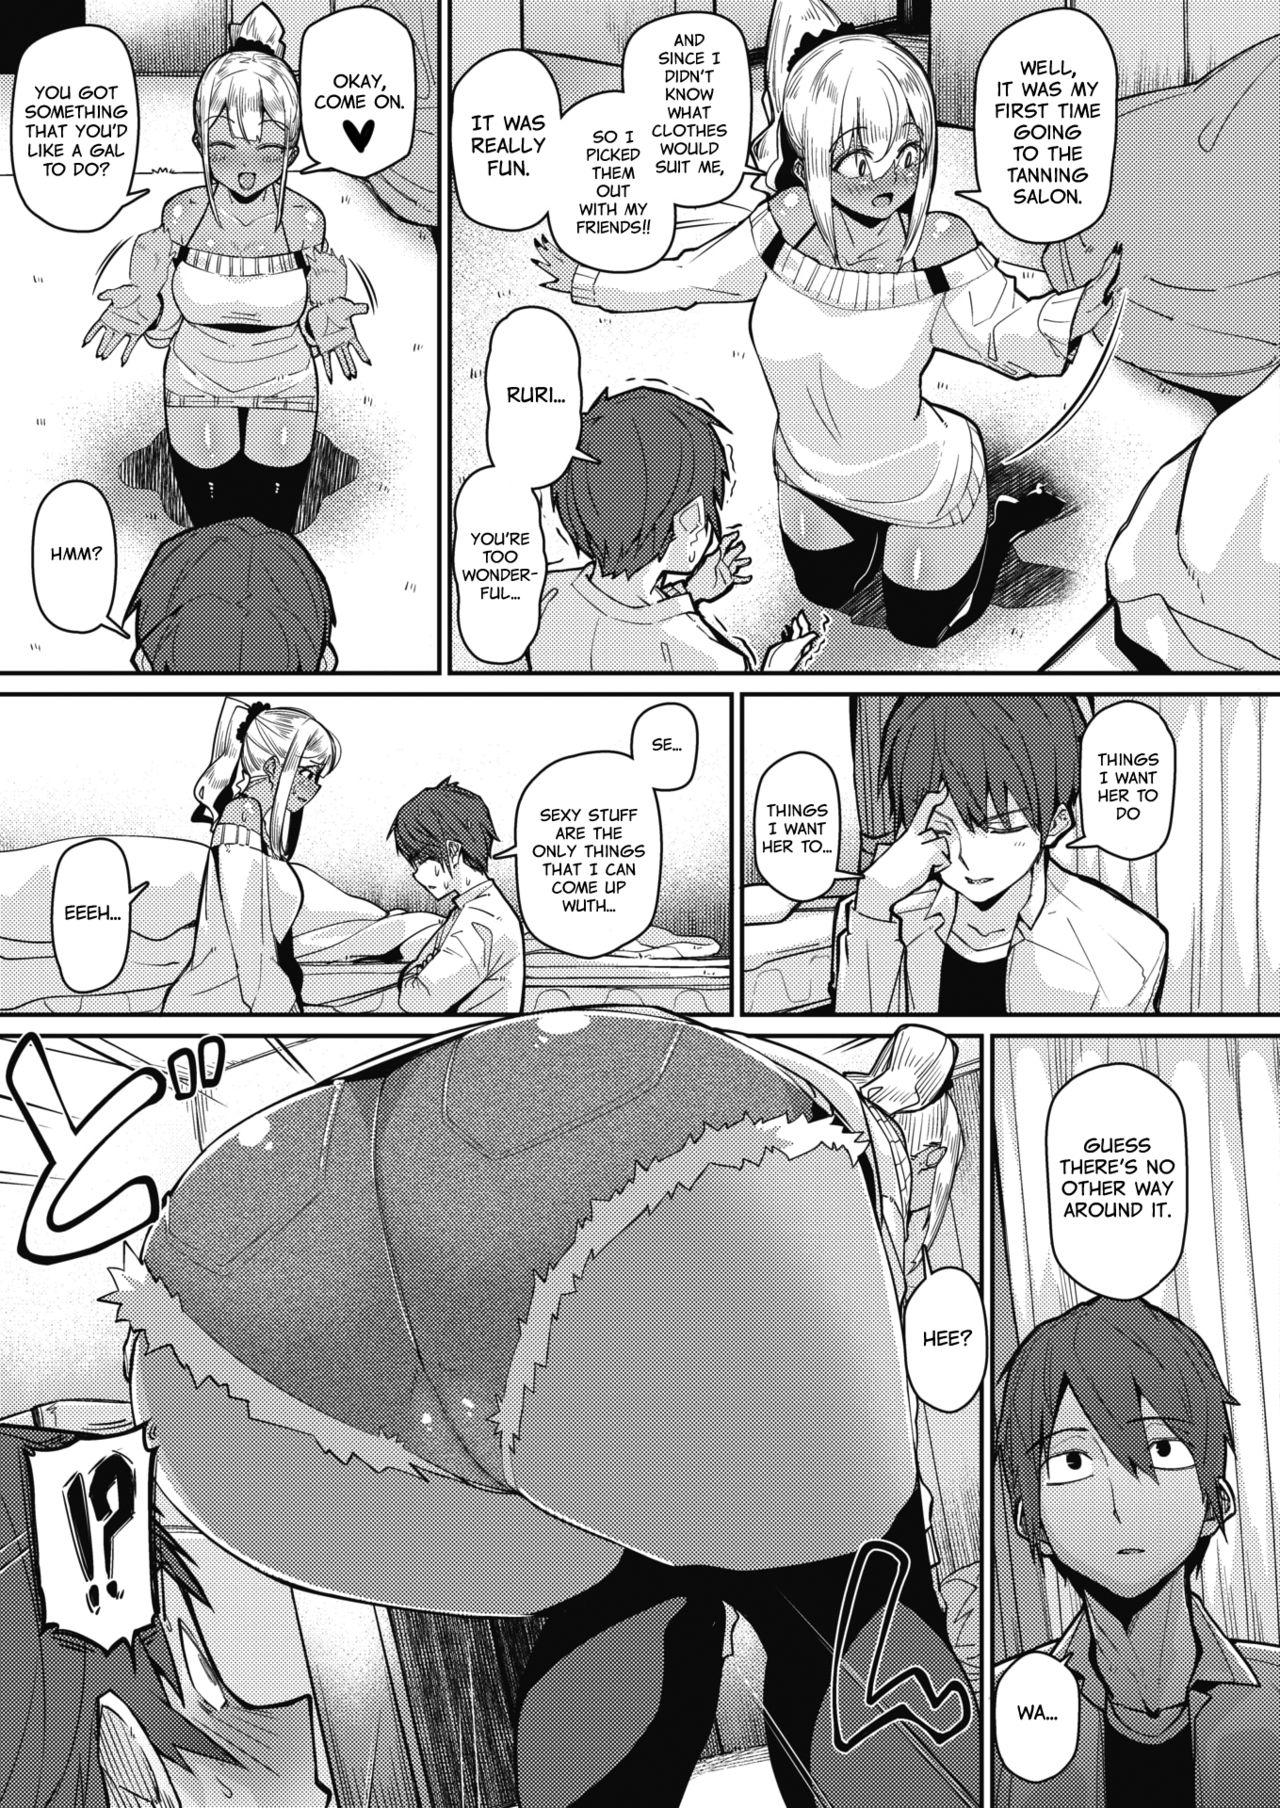 Secret Gekkan "Za Bicchi" wo Mita Onna no Hannou ni Tsuite | About the Reaction of the Girl Who Saw "The Bitch Monthly" Foot Job - Page 5